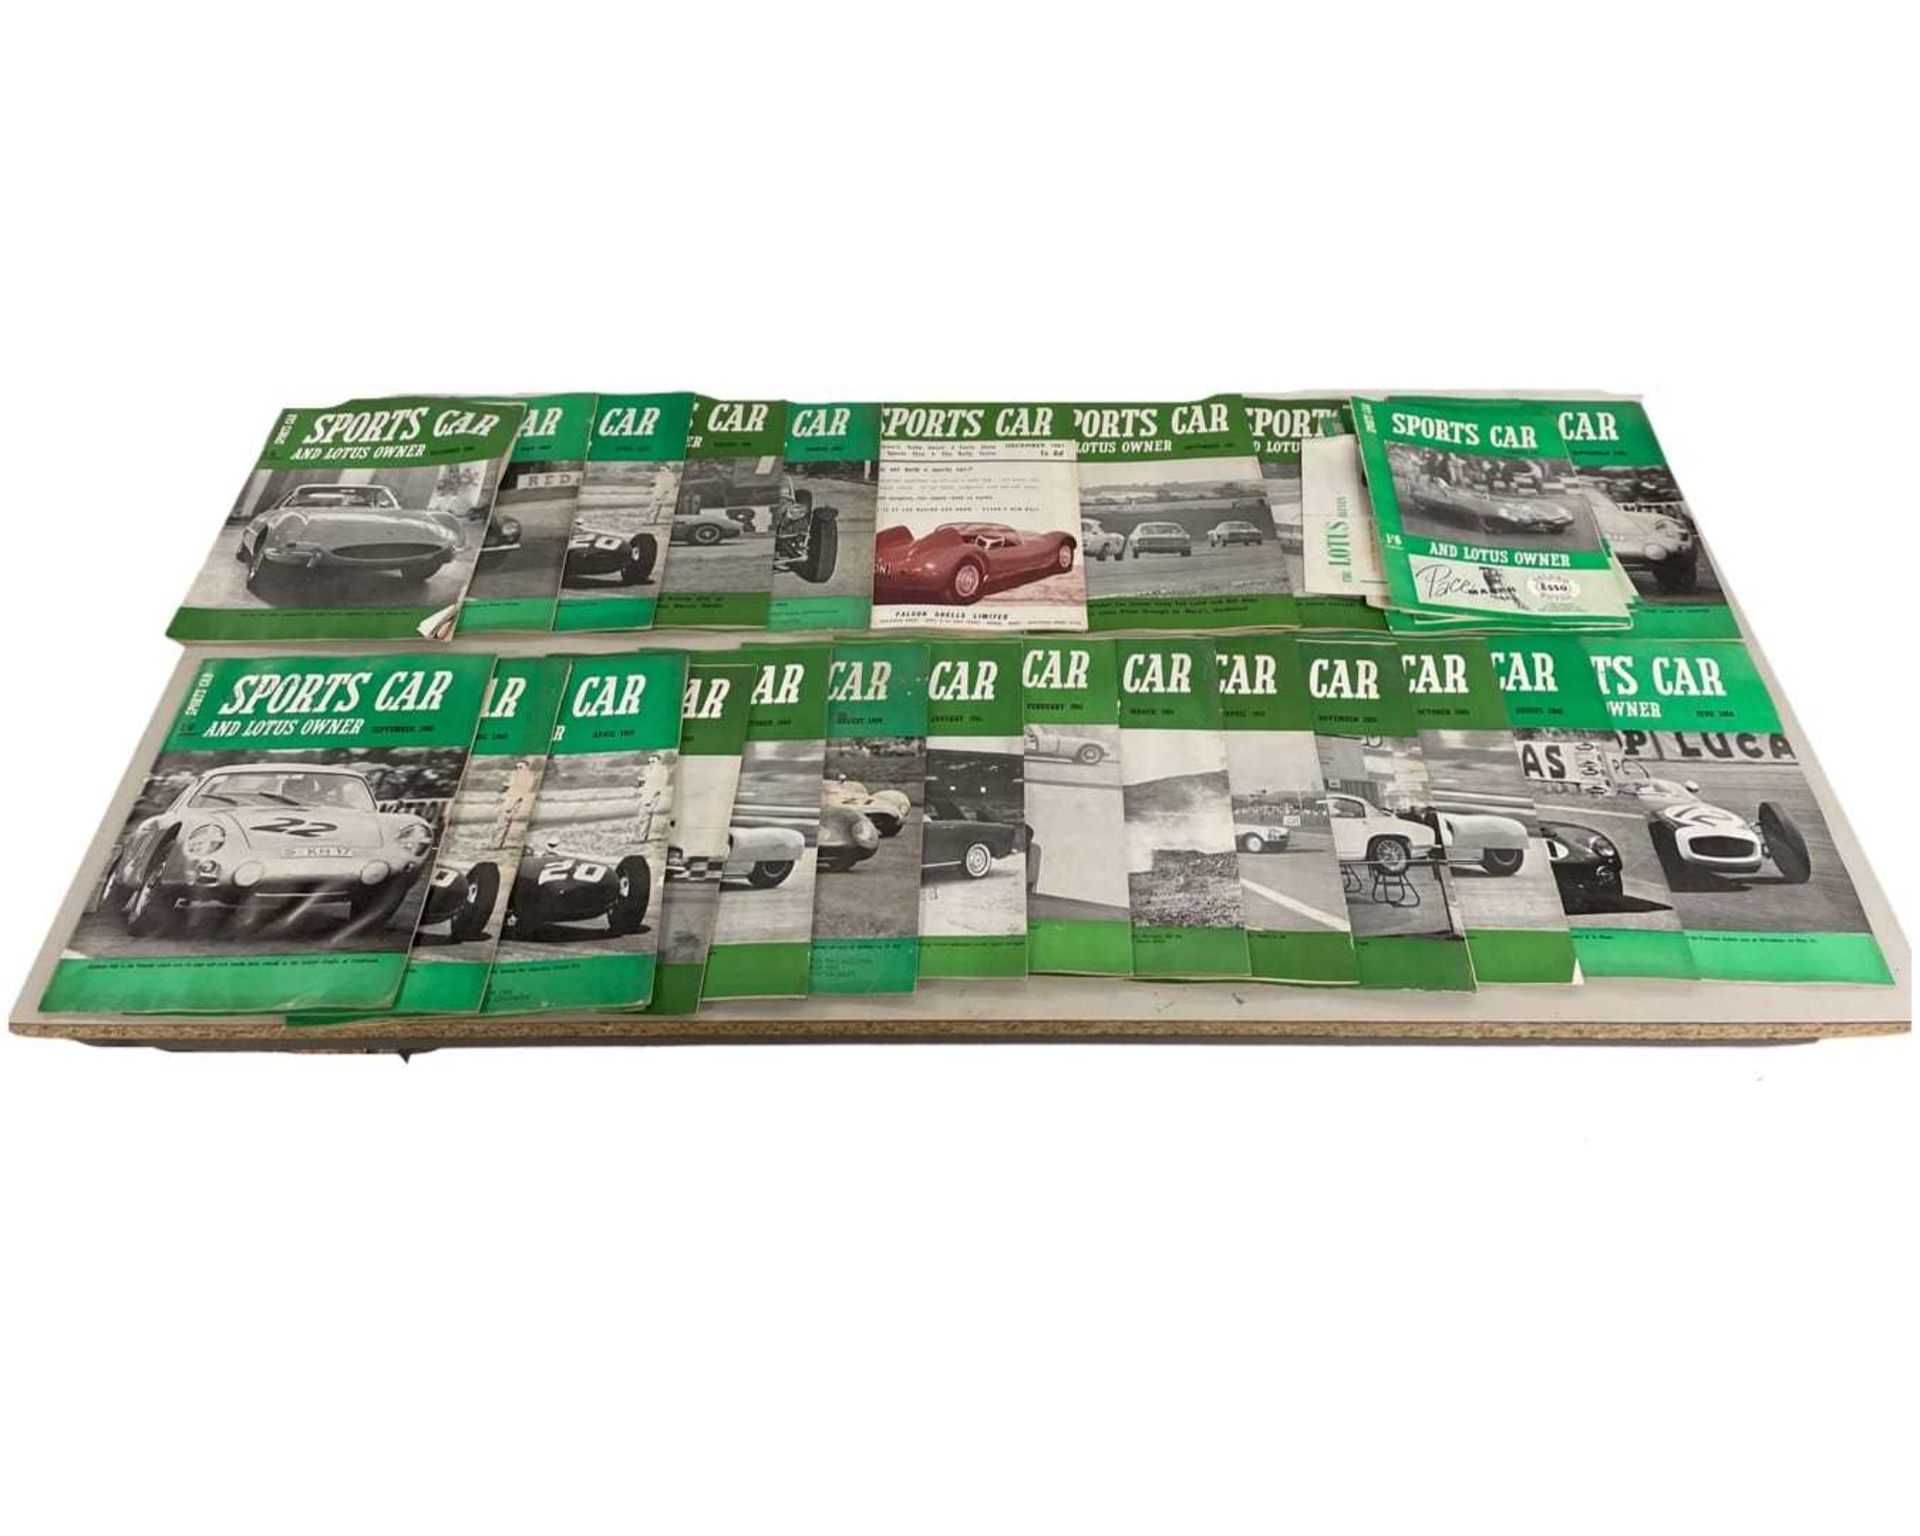 25 sports car and Lotus owner magazines from 1957 to 1961